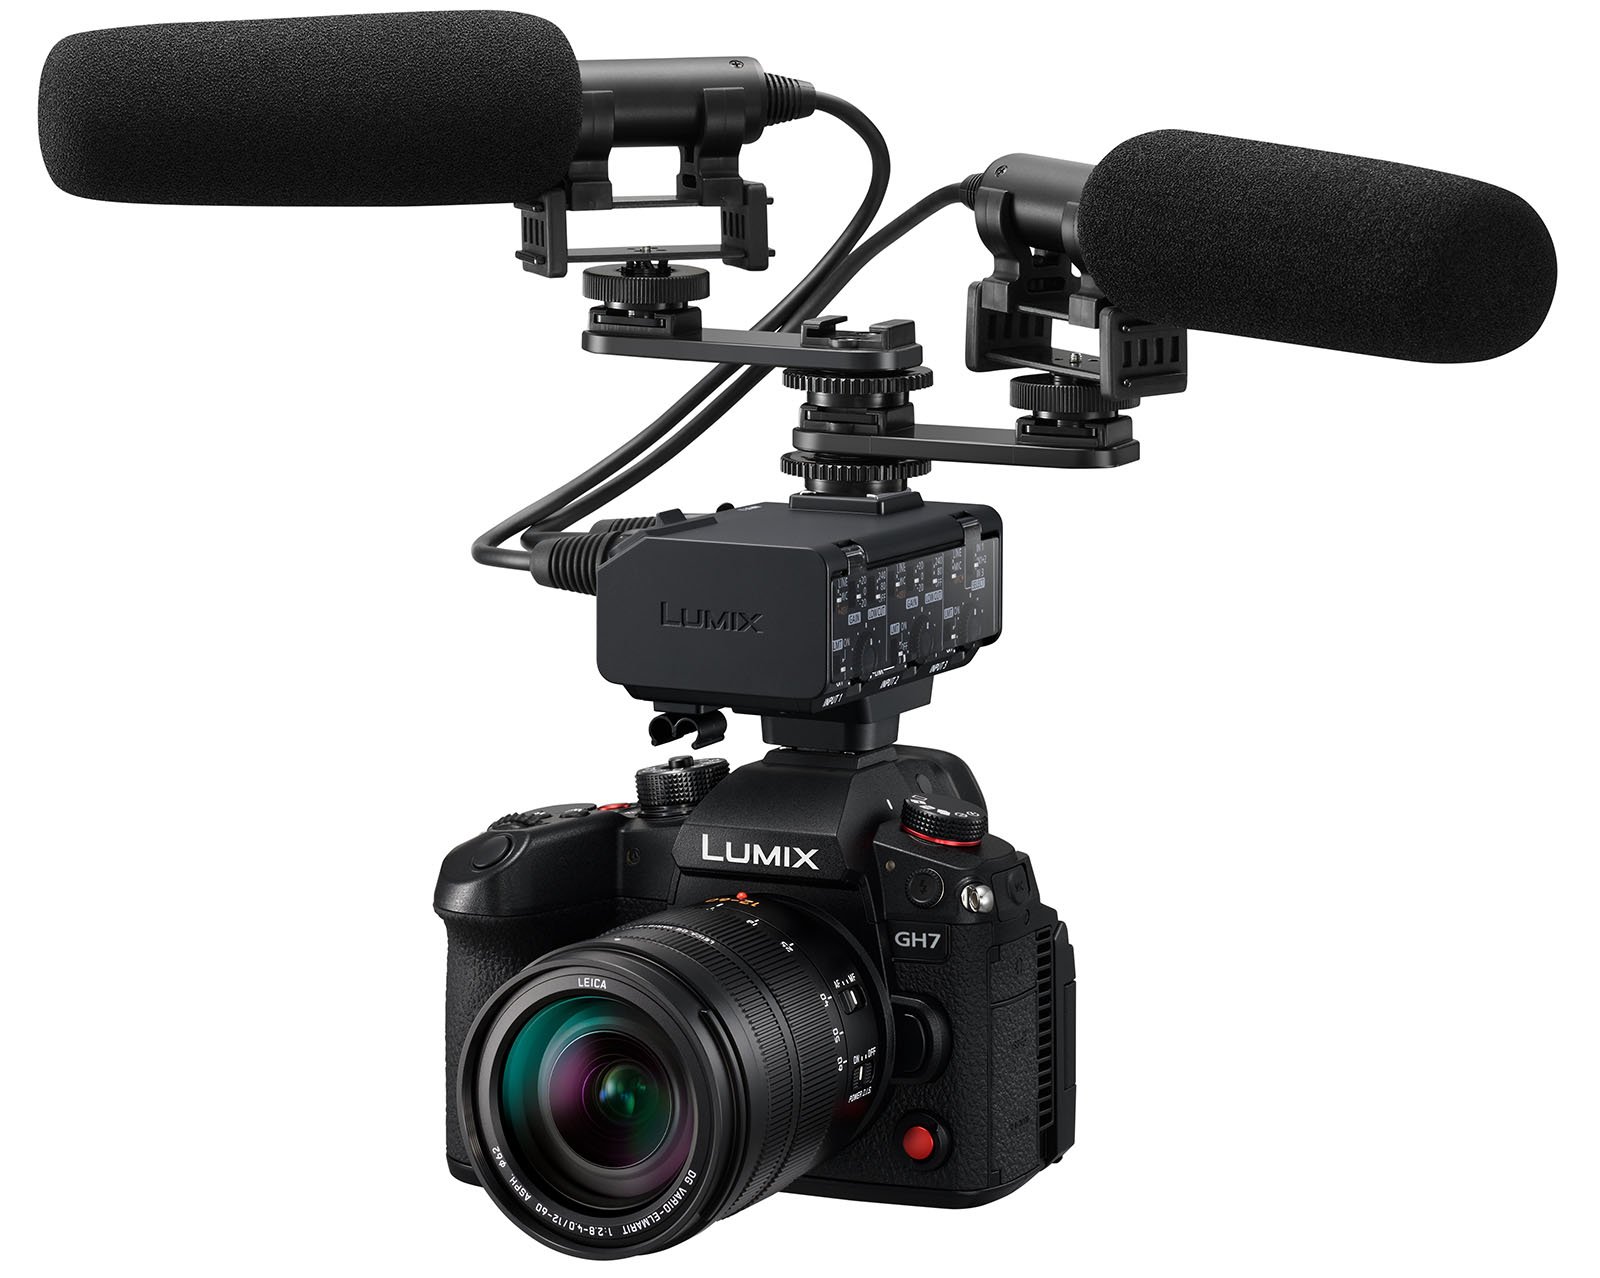 A Panasonic Lumix GH7 camera is equipped with a lens and dual shotgun microphones mounted on top. The microphones are connected to the camera via an audio interface, enhancing the camera's video recording capabilities.